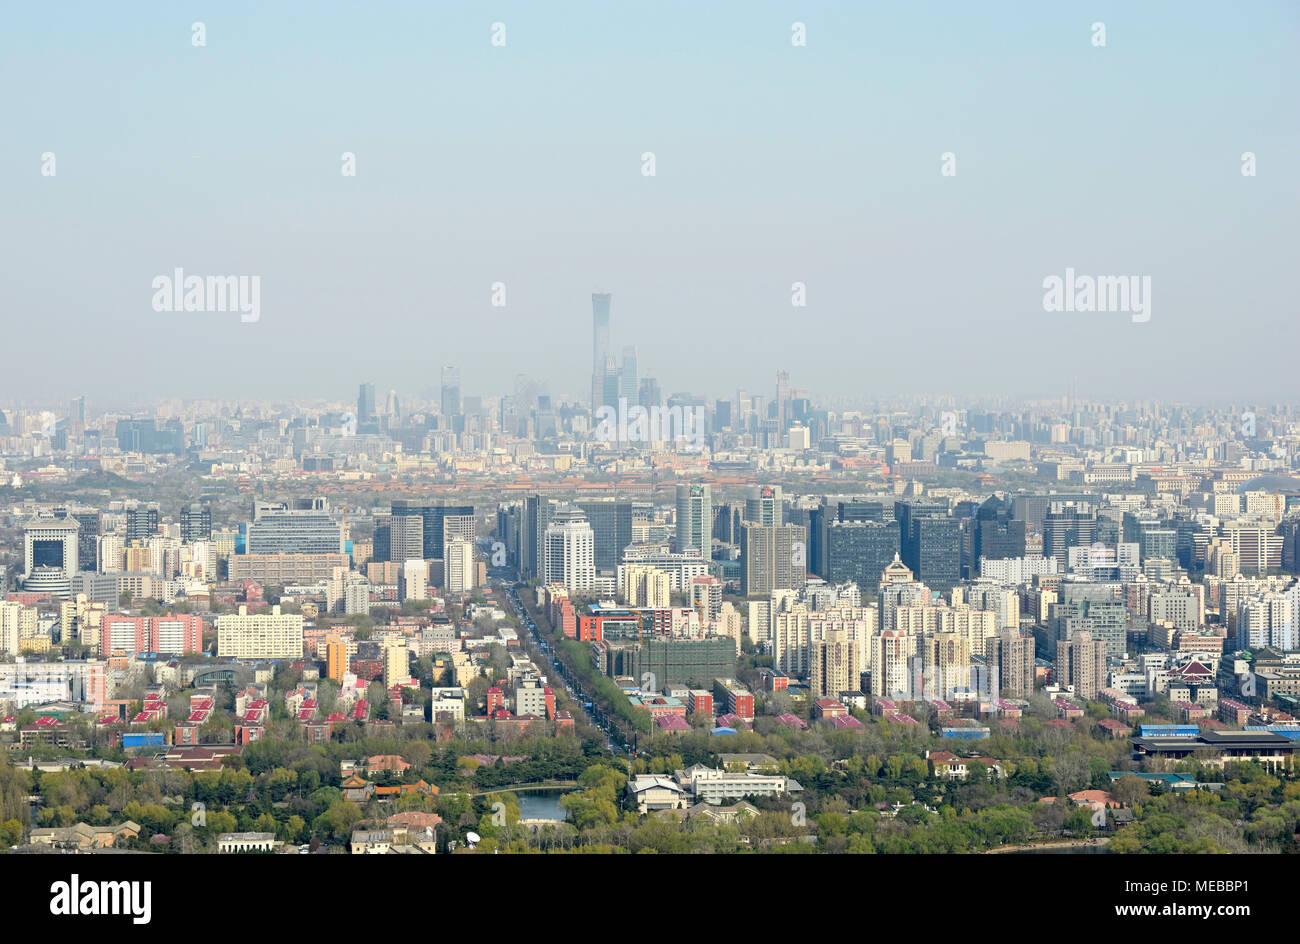 View over Beijing looking east from the China Central Television tower, Beijing, China, with China Zun tower prominent in the CBD in the distance Stock Photo